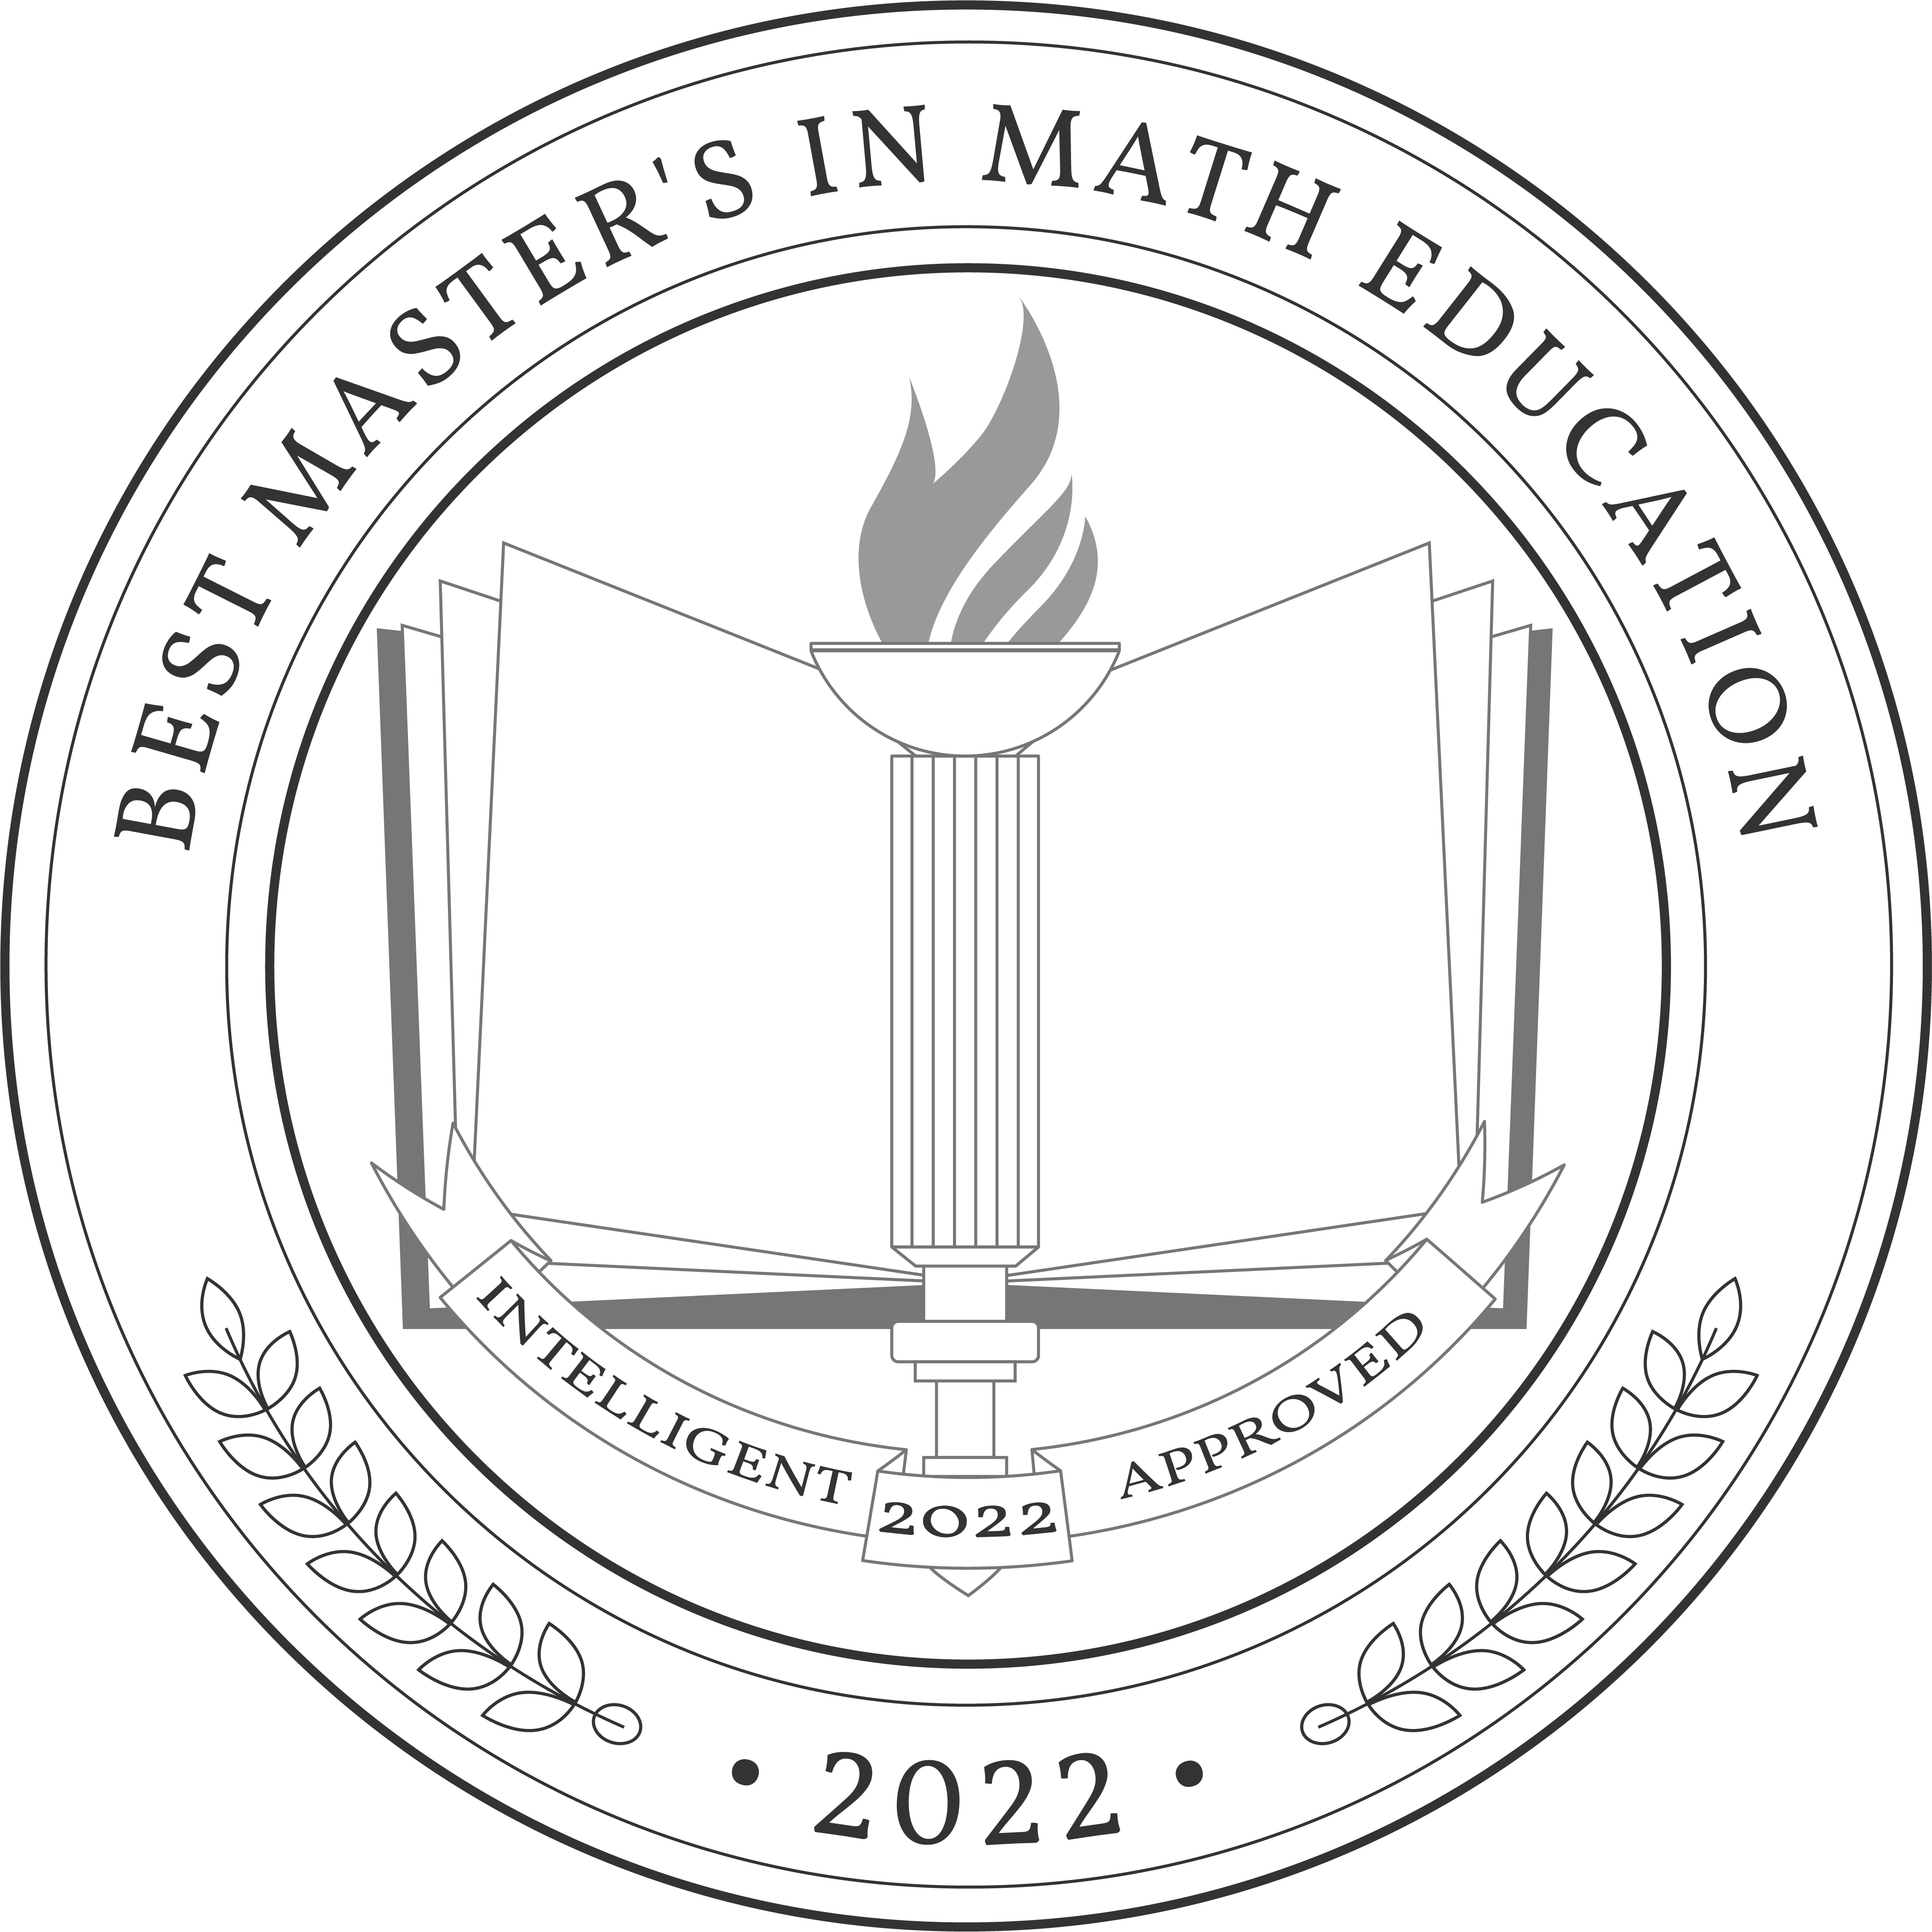 Best Master's in Math Education Badge-1